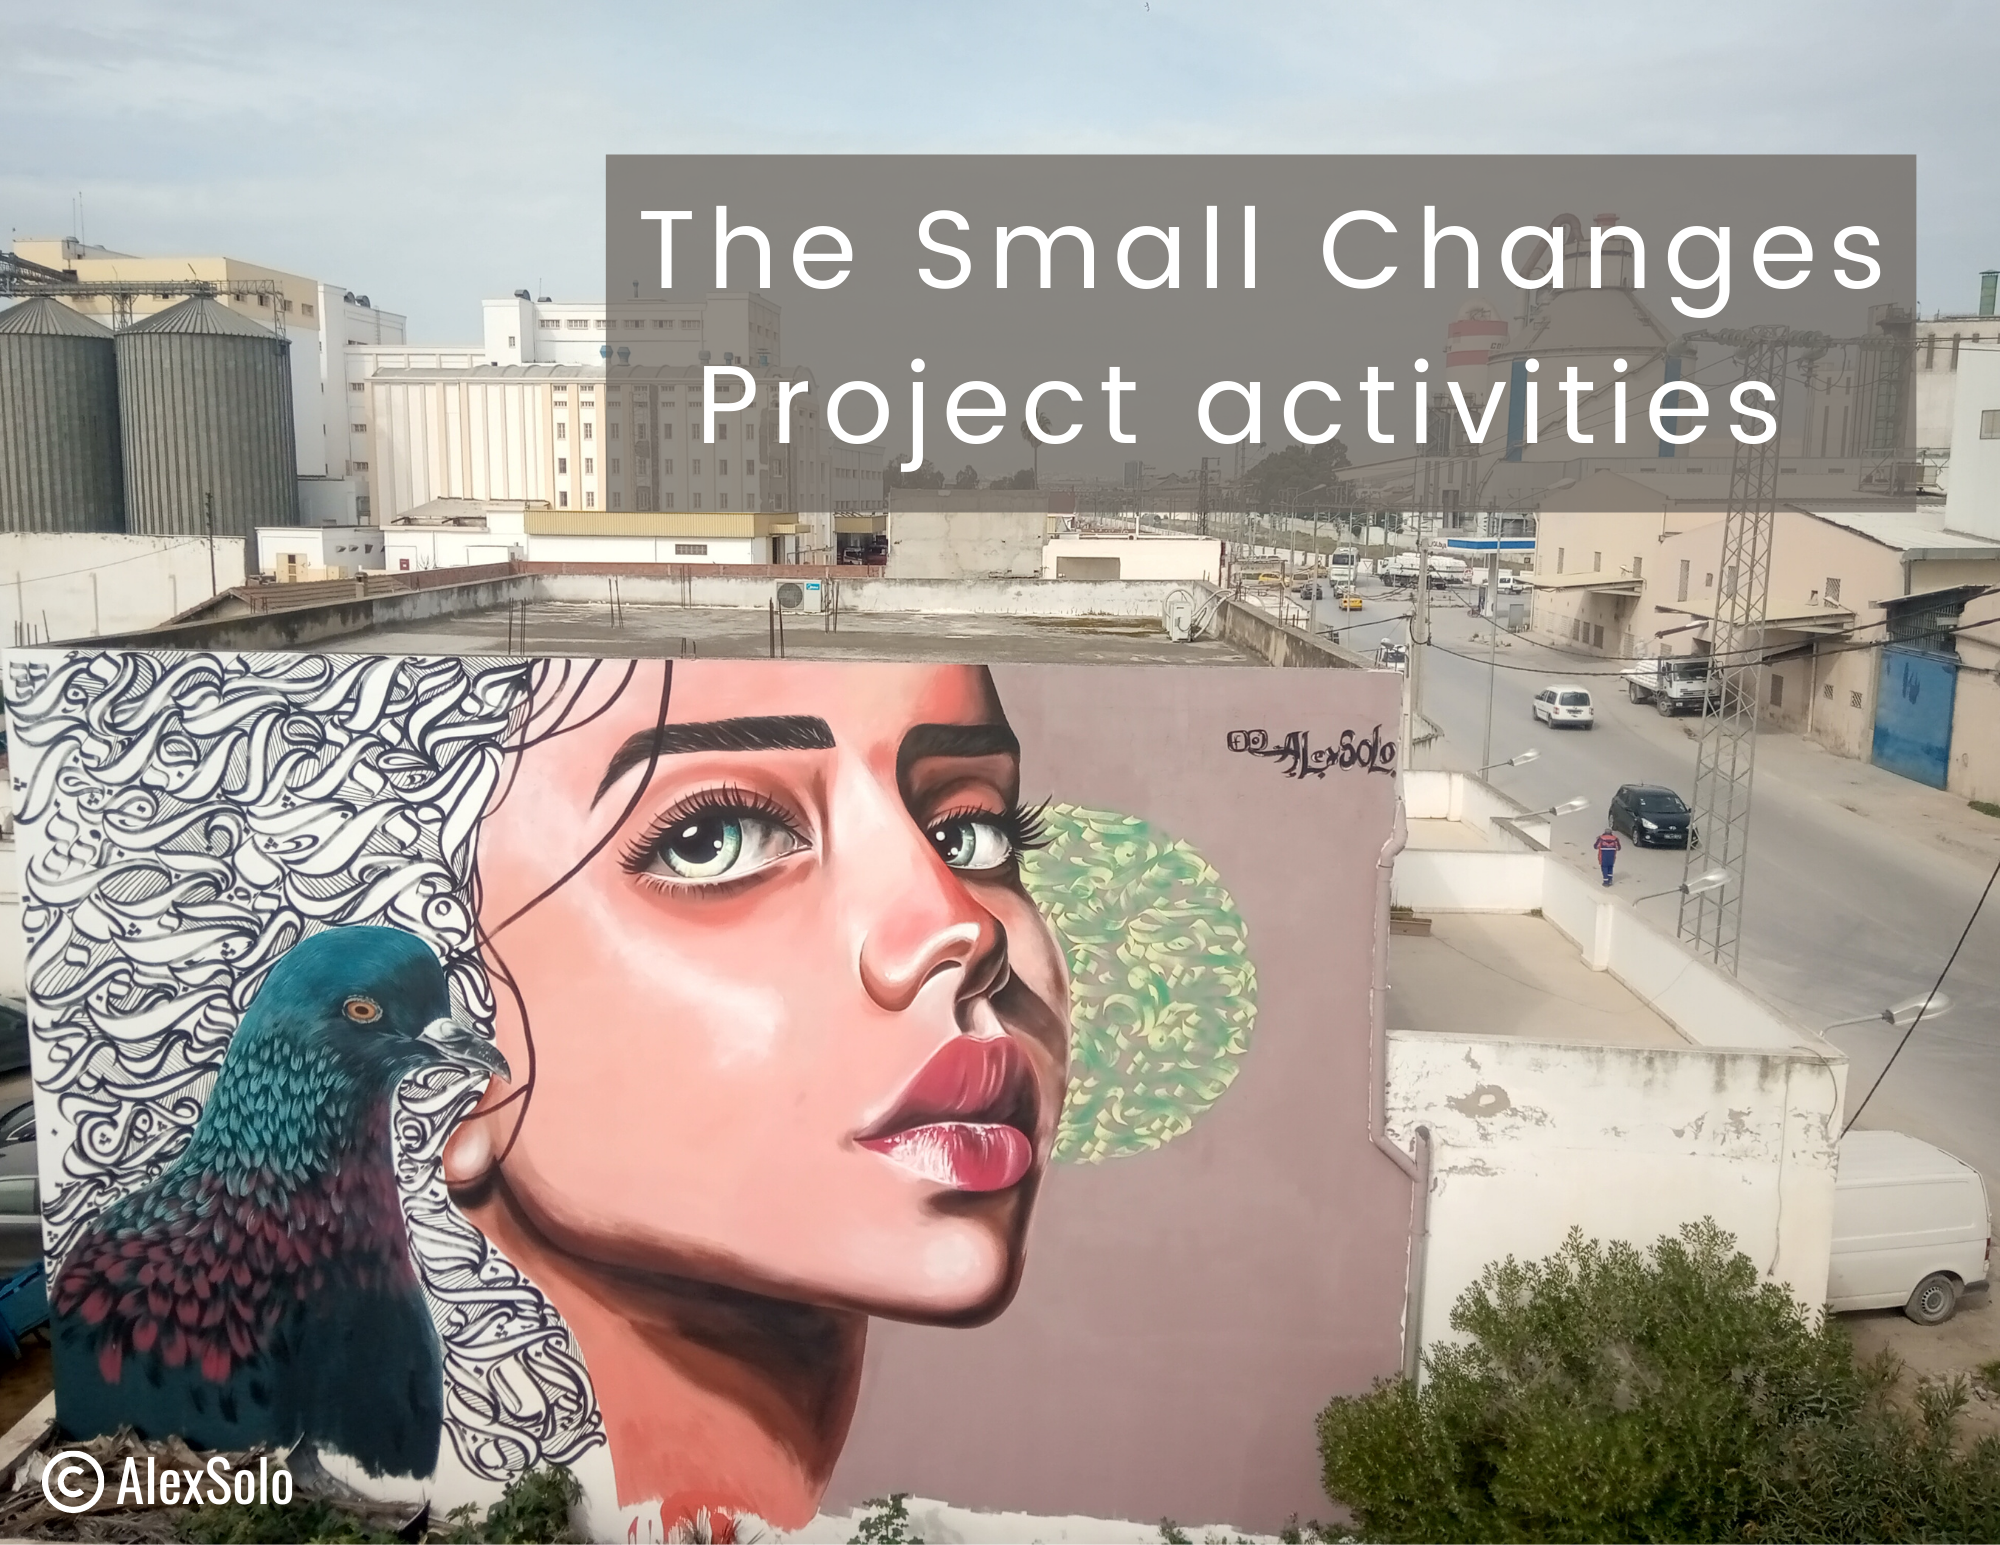 The Small Changes Project Activities Image Slidergallery On Subsite (1) (1)